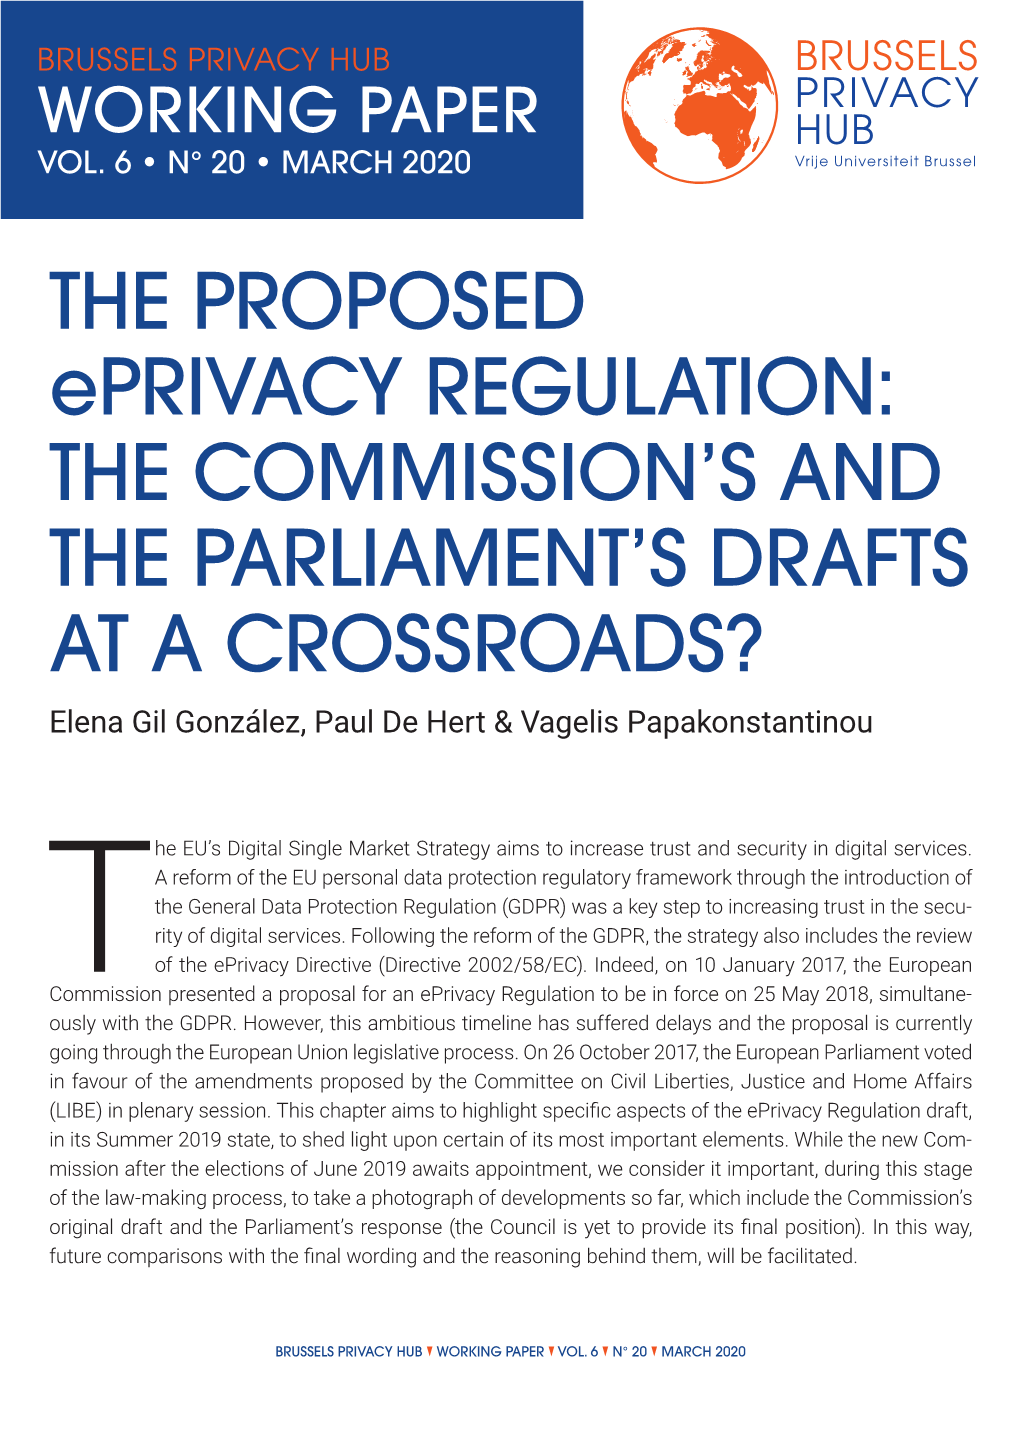 THE PROPOSED Eprivacy REGULATION: the COMMISSION’S and the PARLIAMENT’S DRAFTS at a CROSSROADS? Elena Gil González, Paul De Hert & Vagelis Papakonstantinou